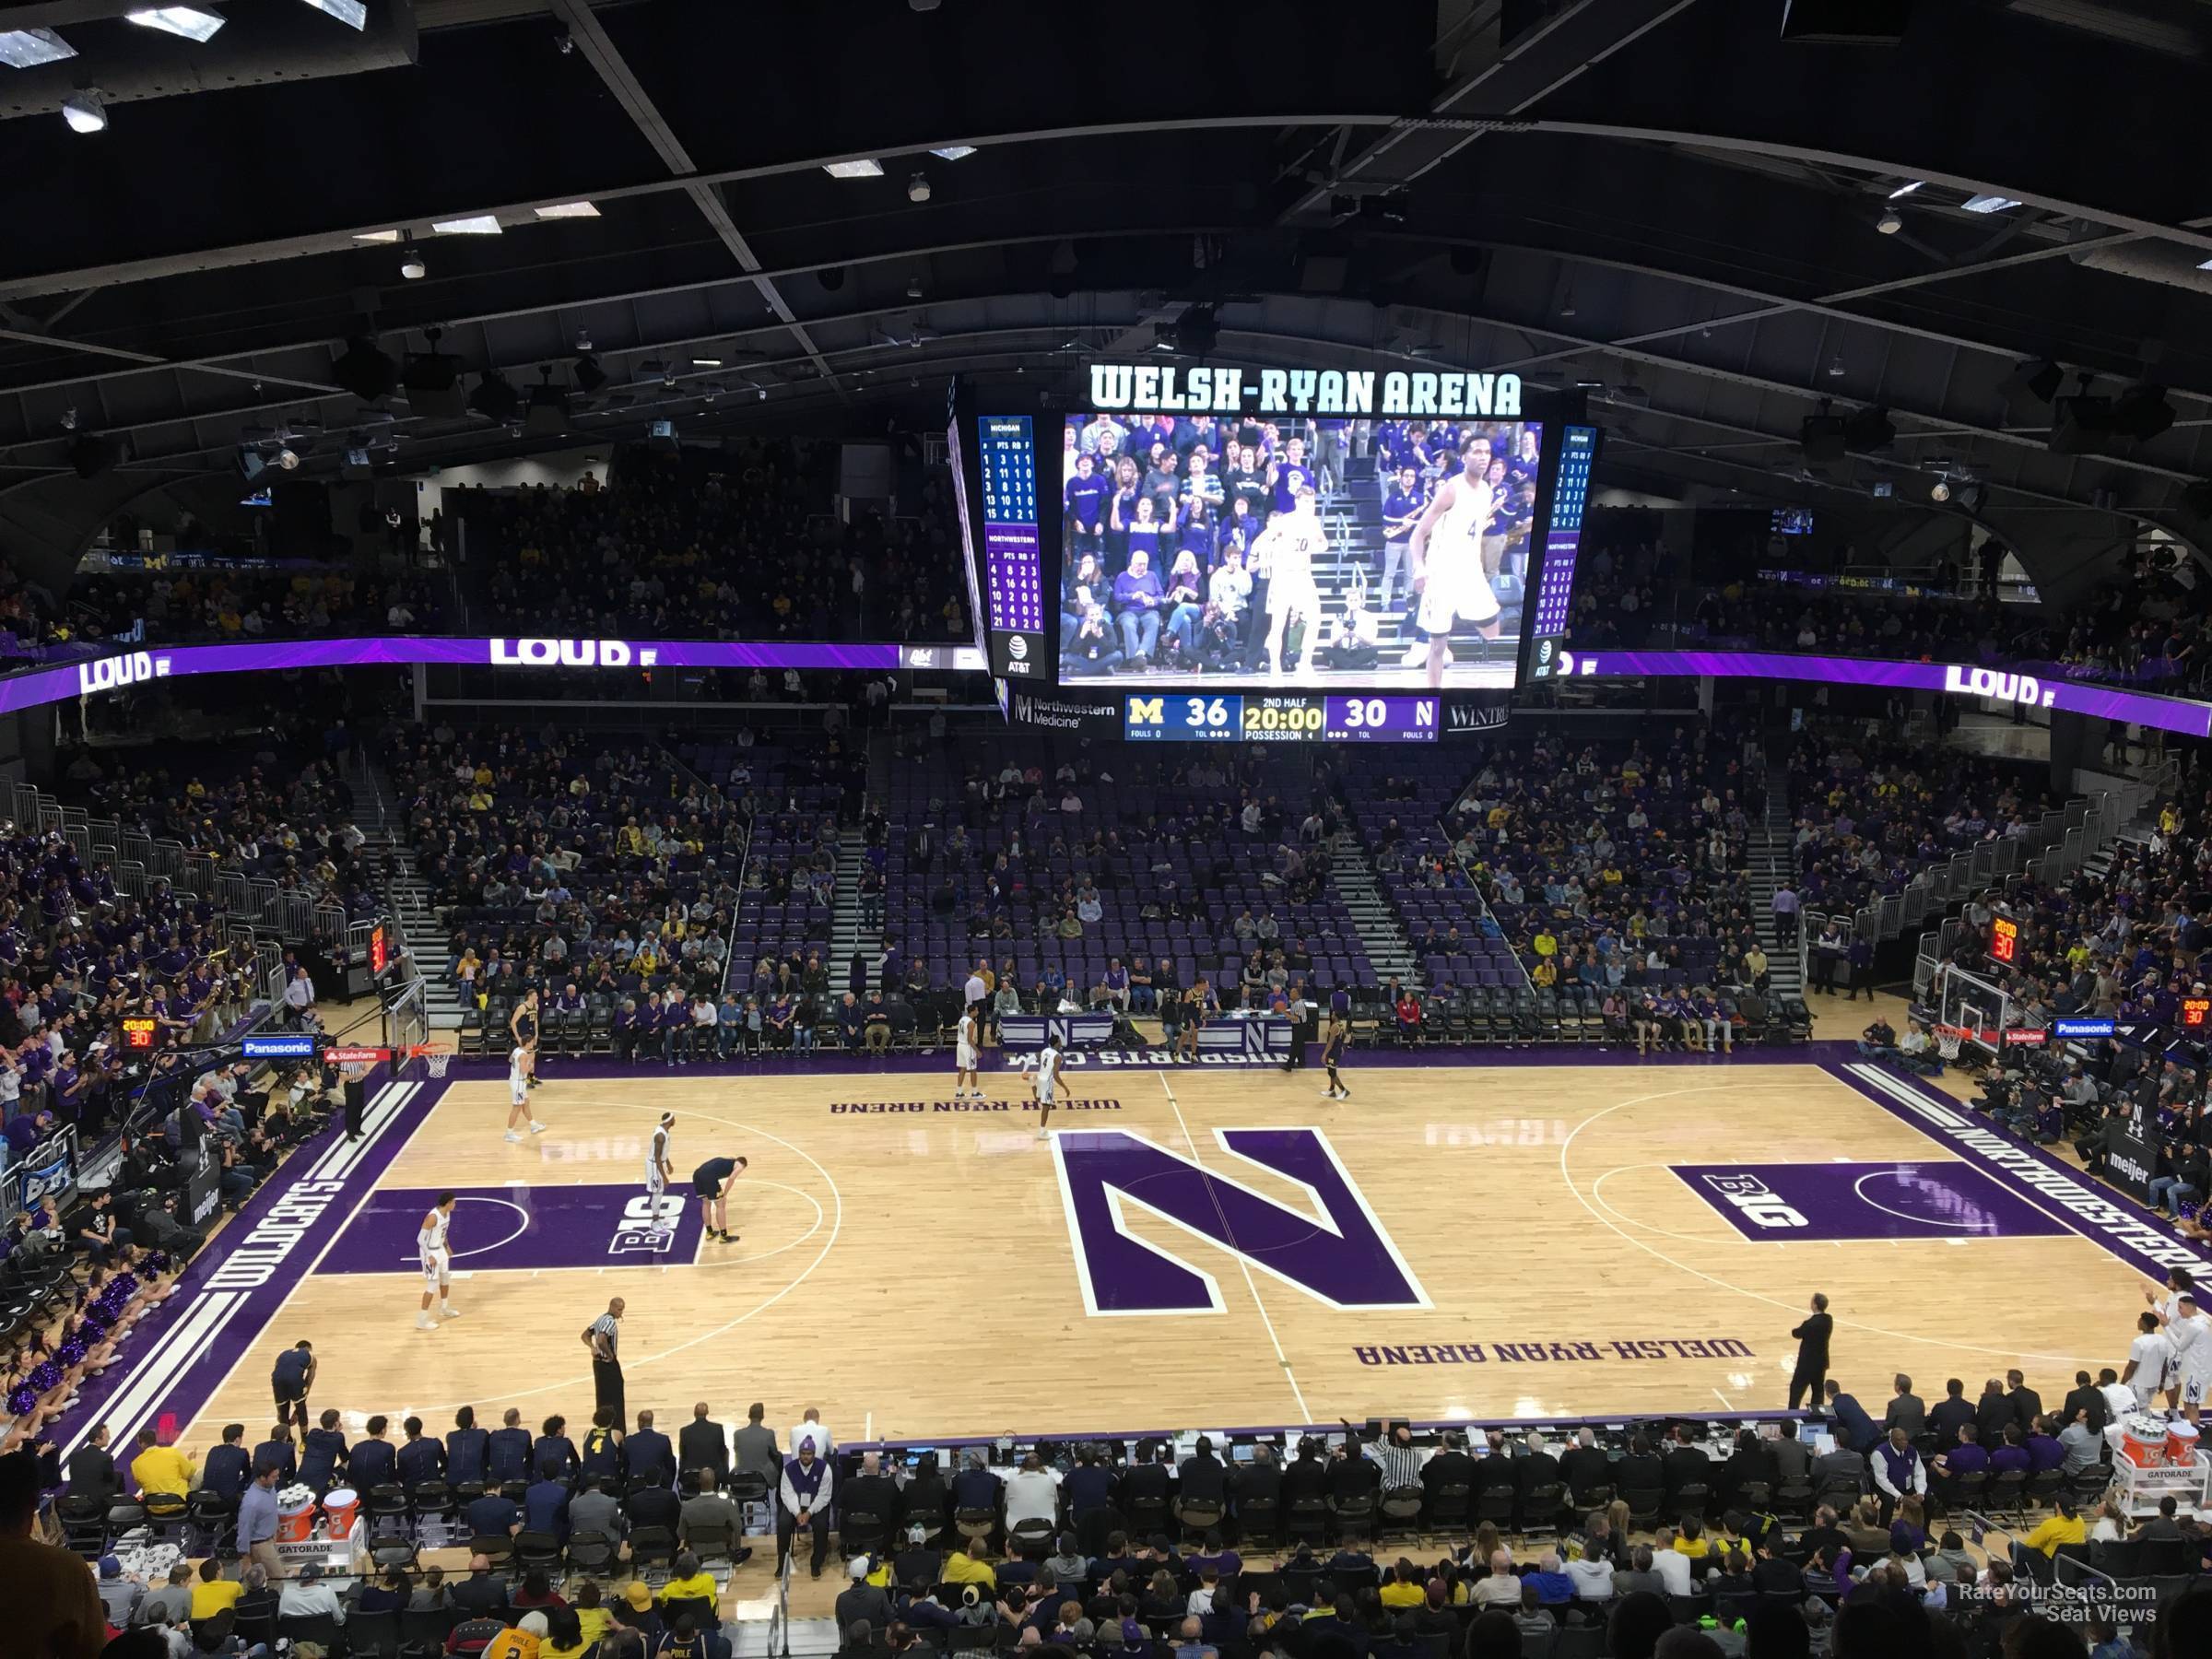 section 209, row 8 seat view  - welsh-ryan arena